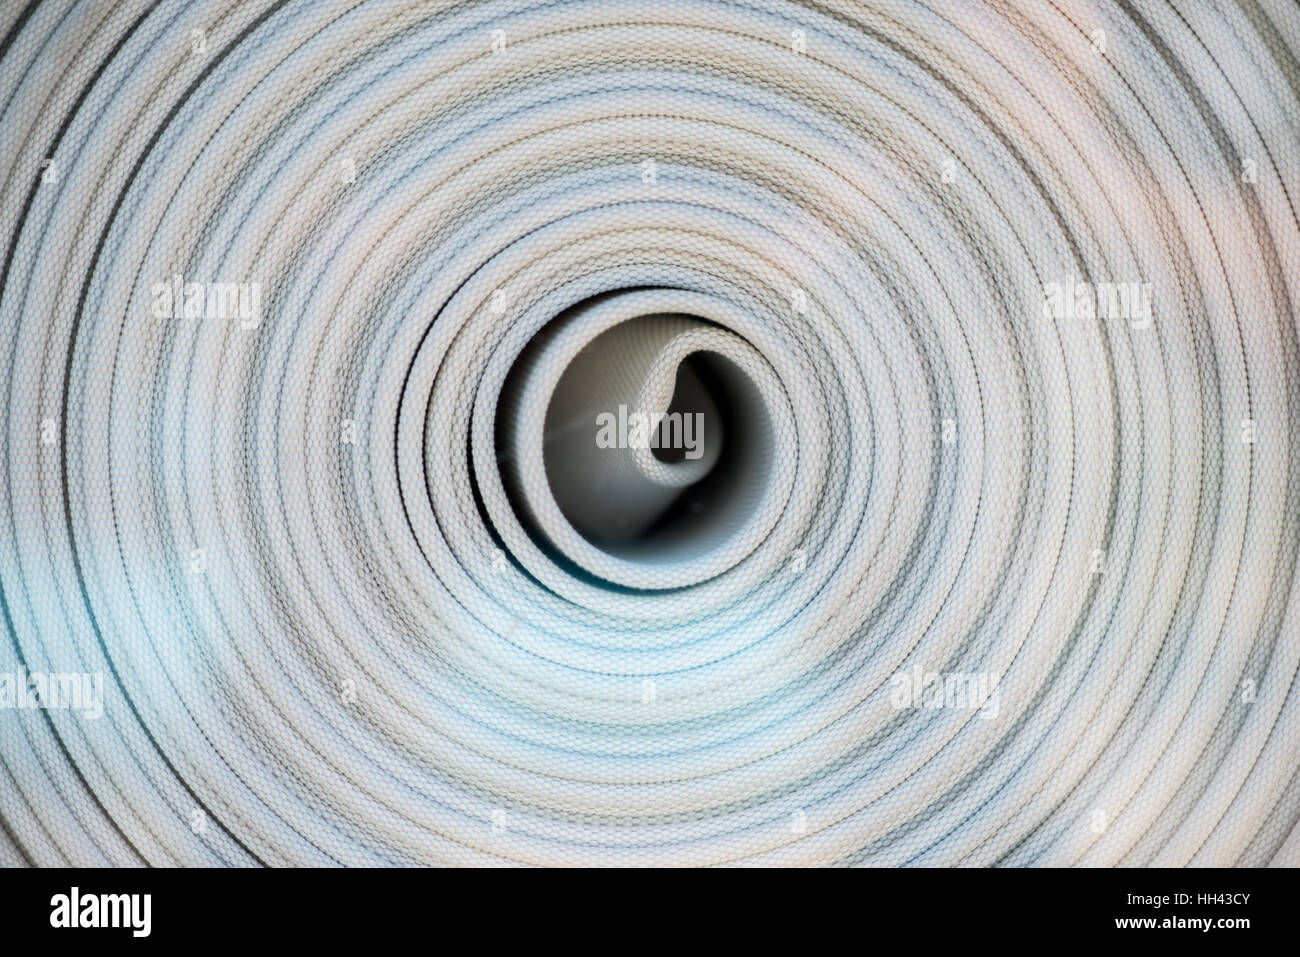 fire fighter hose close up Stock Photo